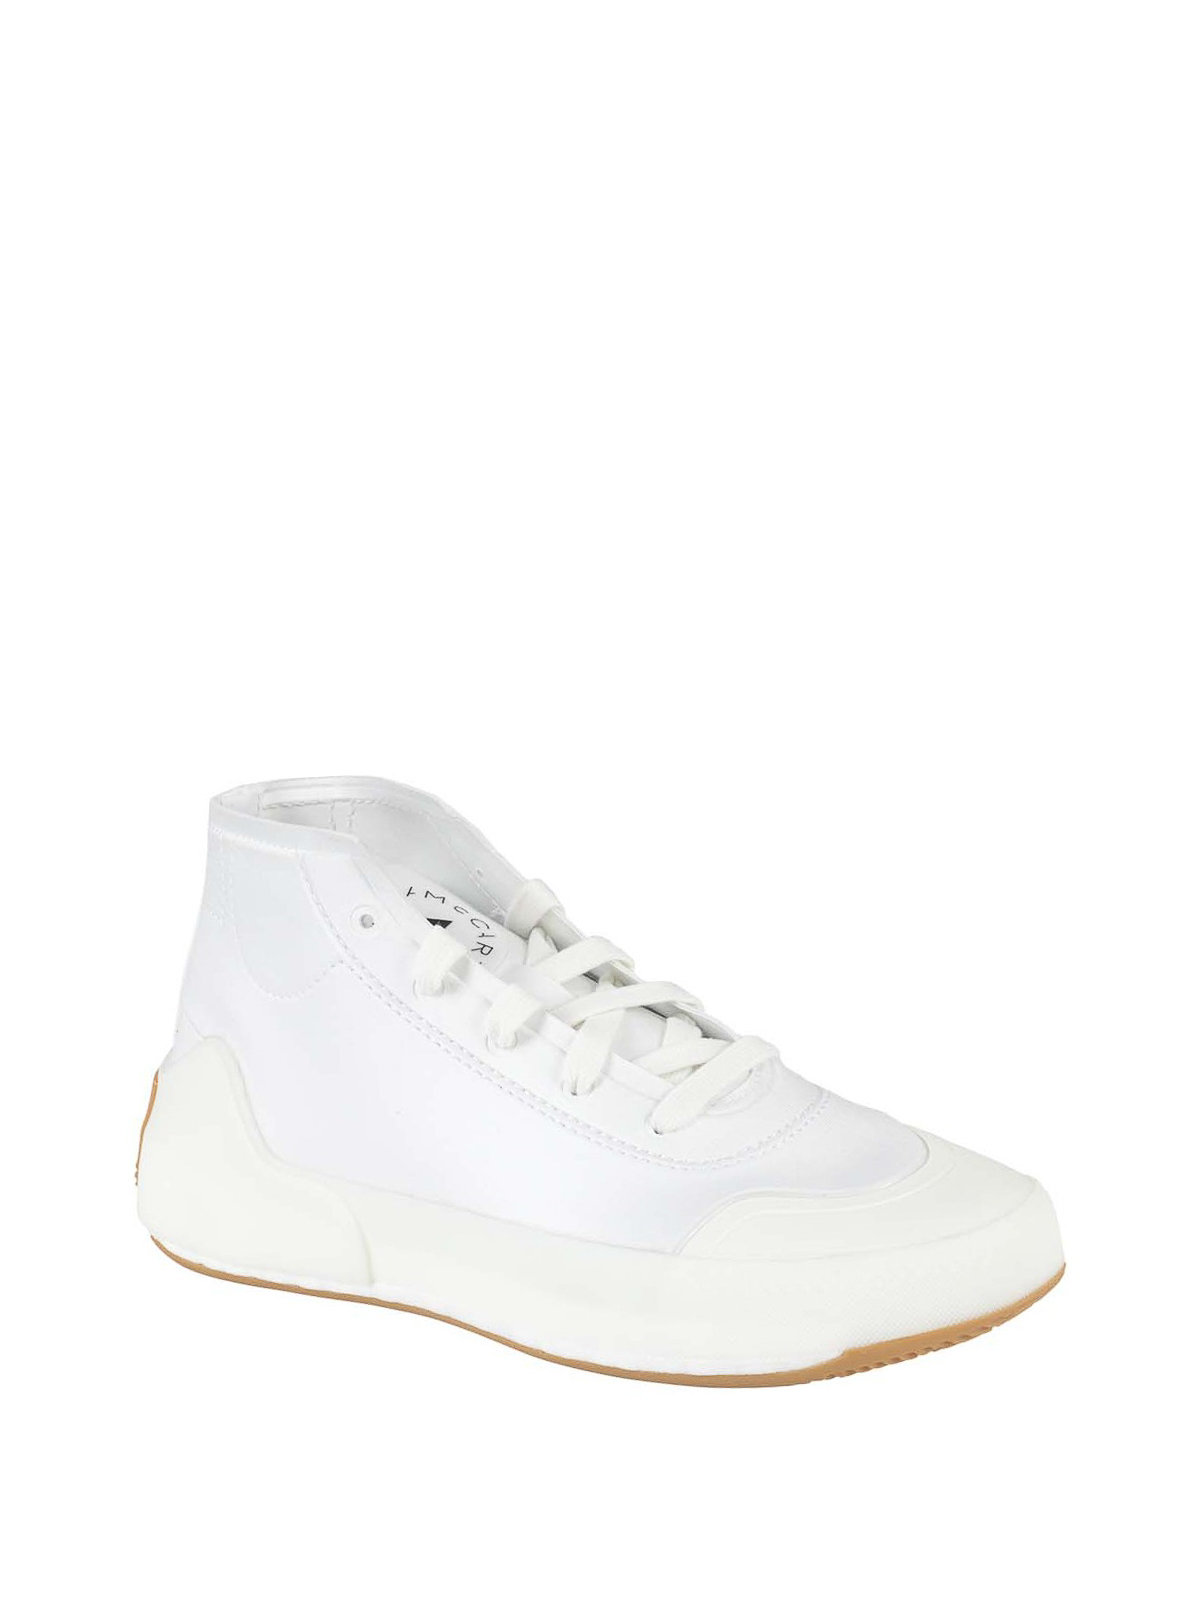 Trainers Adidas by Stella McCartney - Treino Mid-Cut sneakers - FY1176WHITE